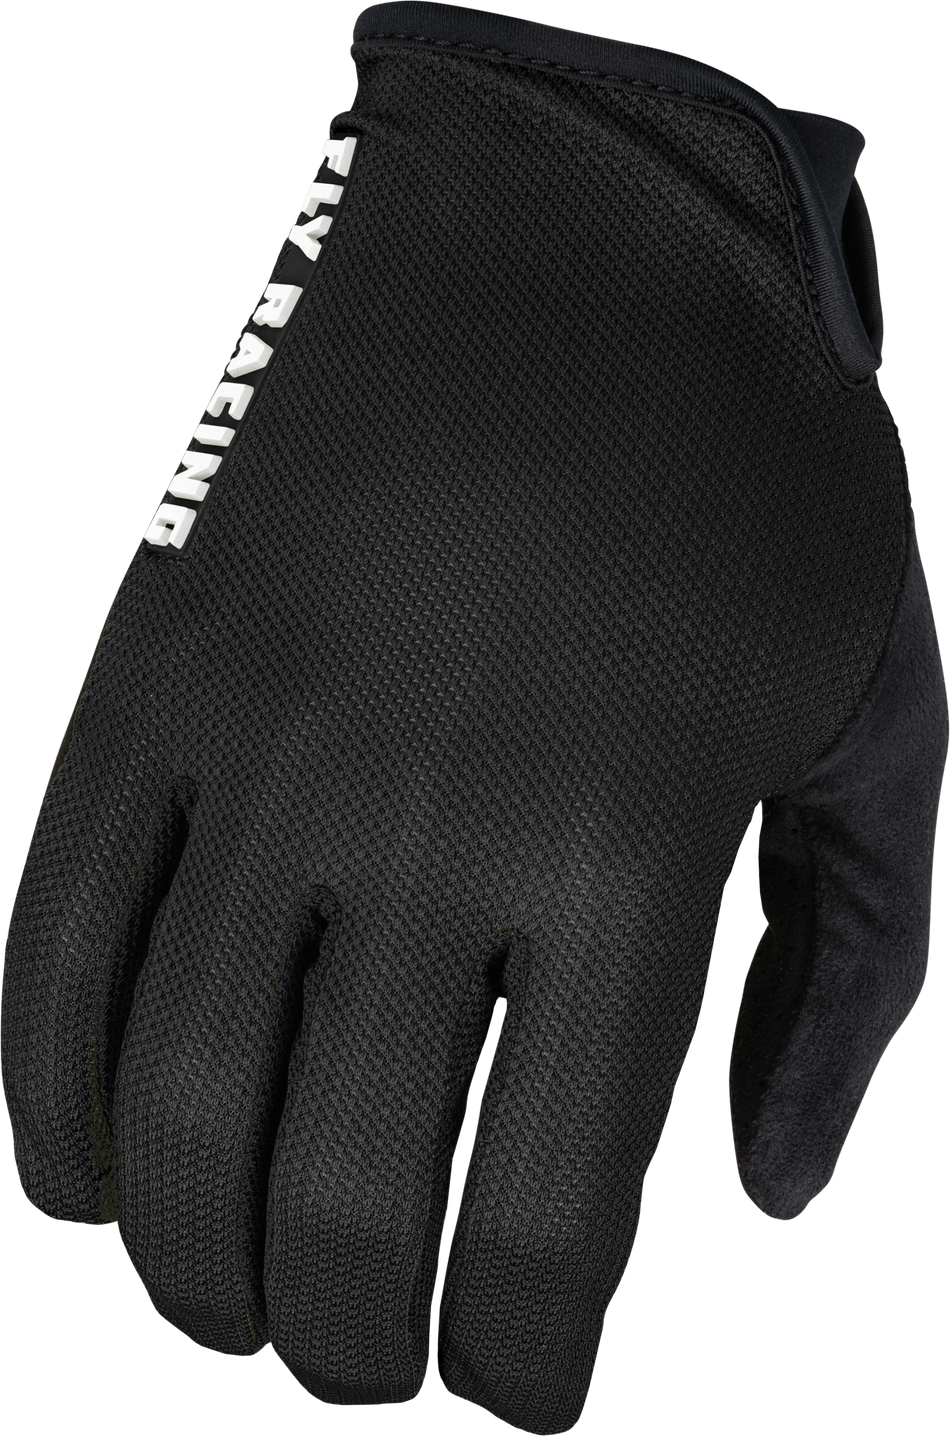 FLY RACING Mesh Gloves Black Md 375-300M